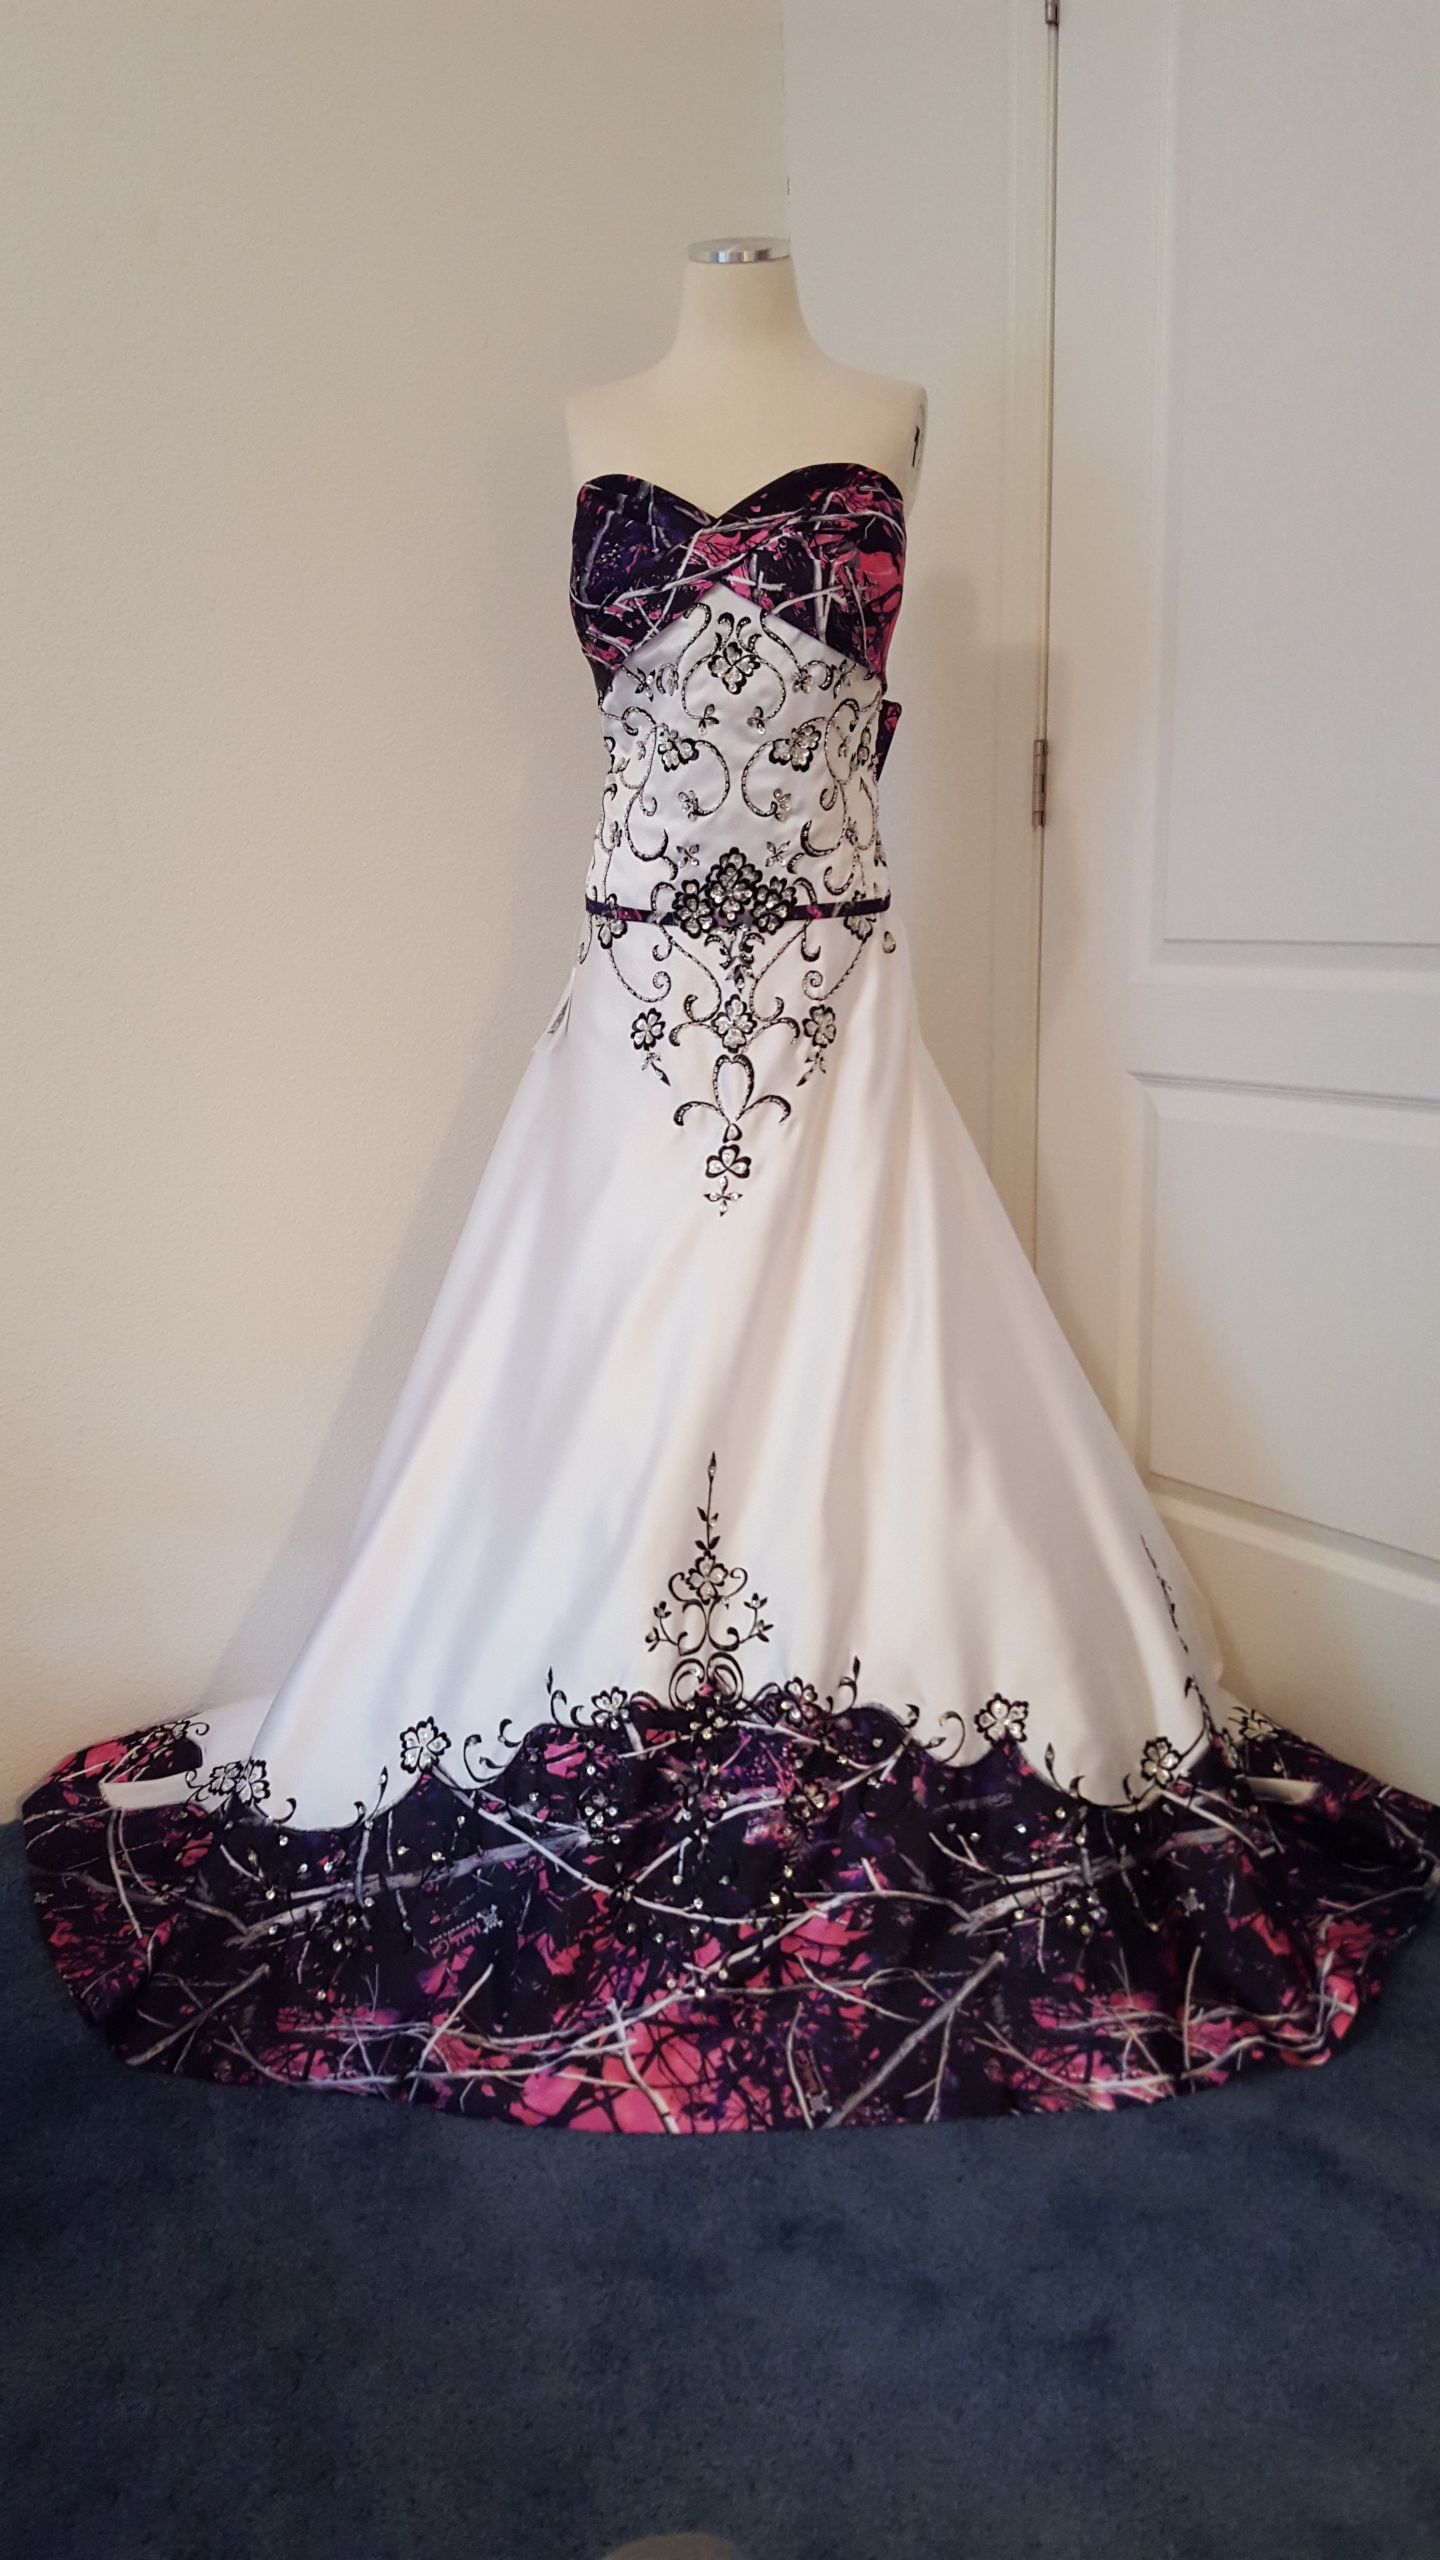 Pink Camo Wedding Dress
 ANITA wedding gown with Muddy Girl camo as the accent